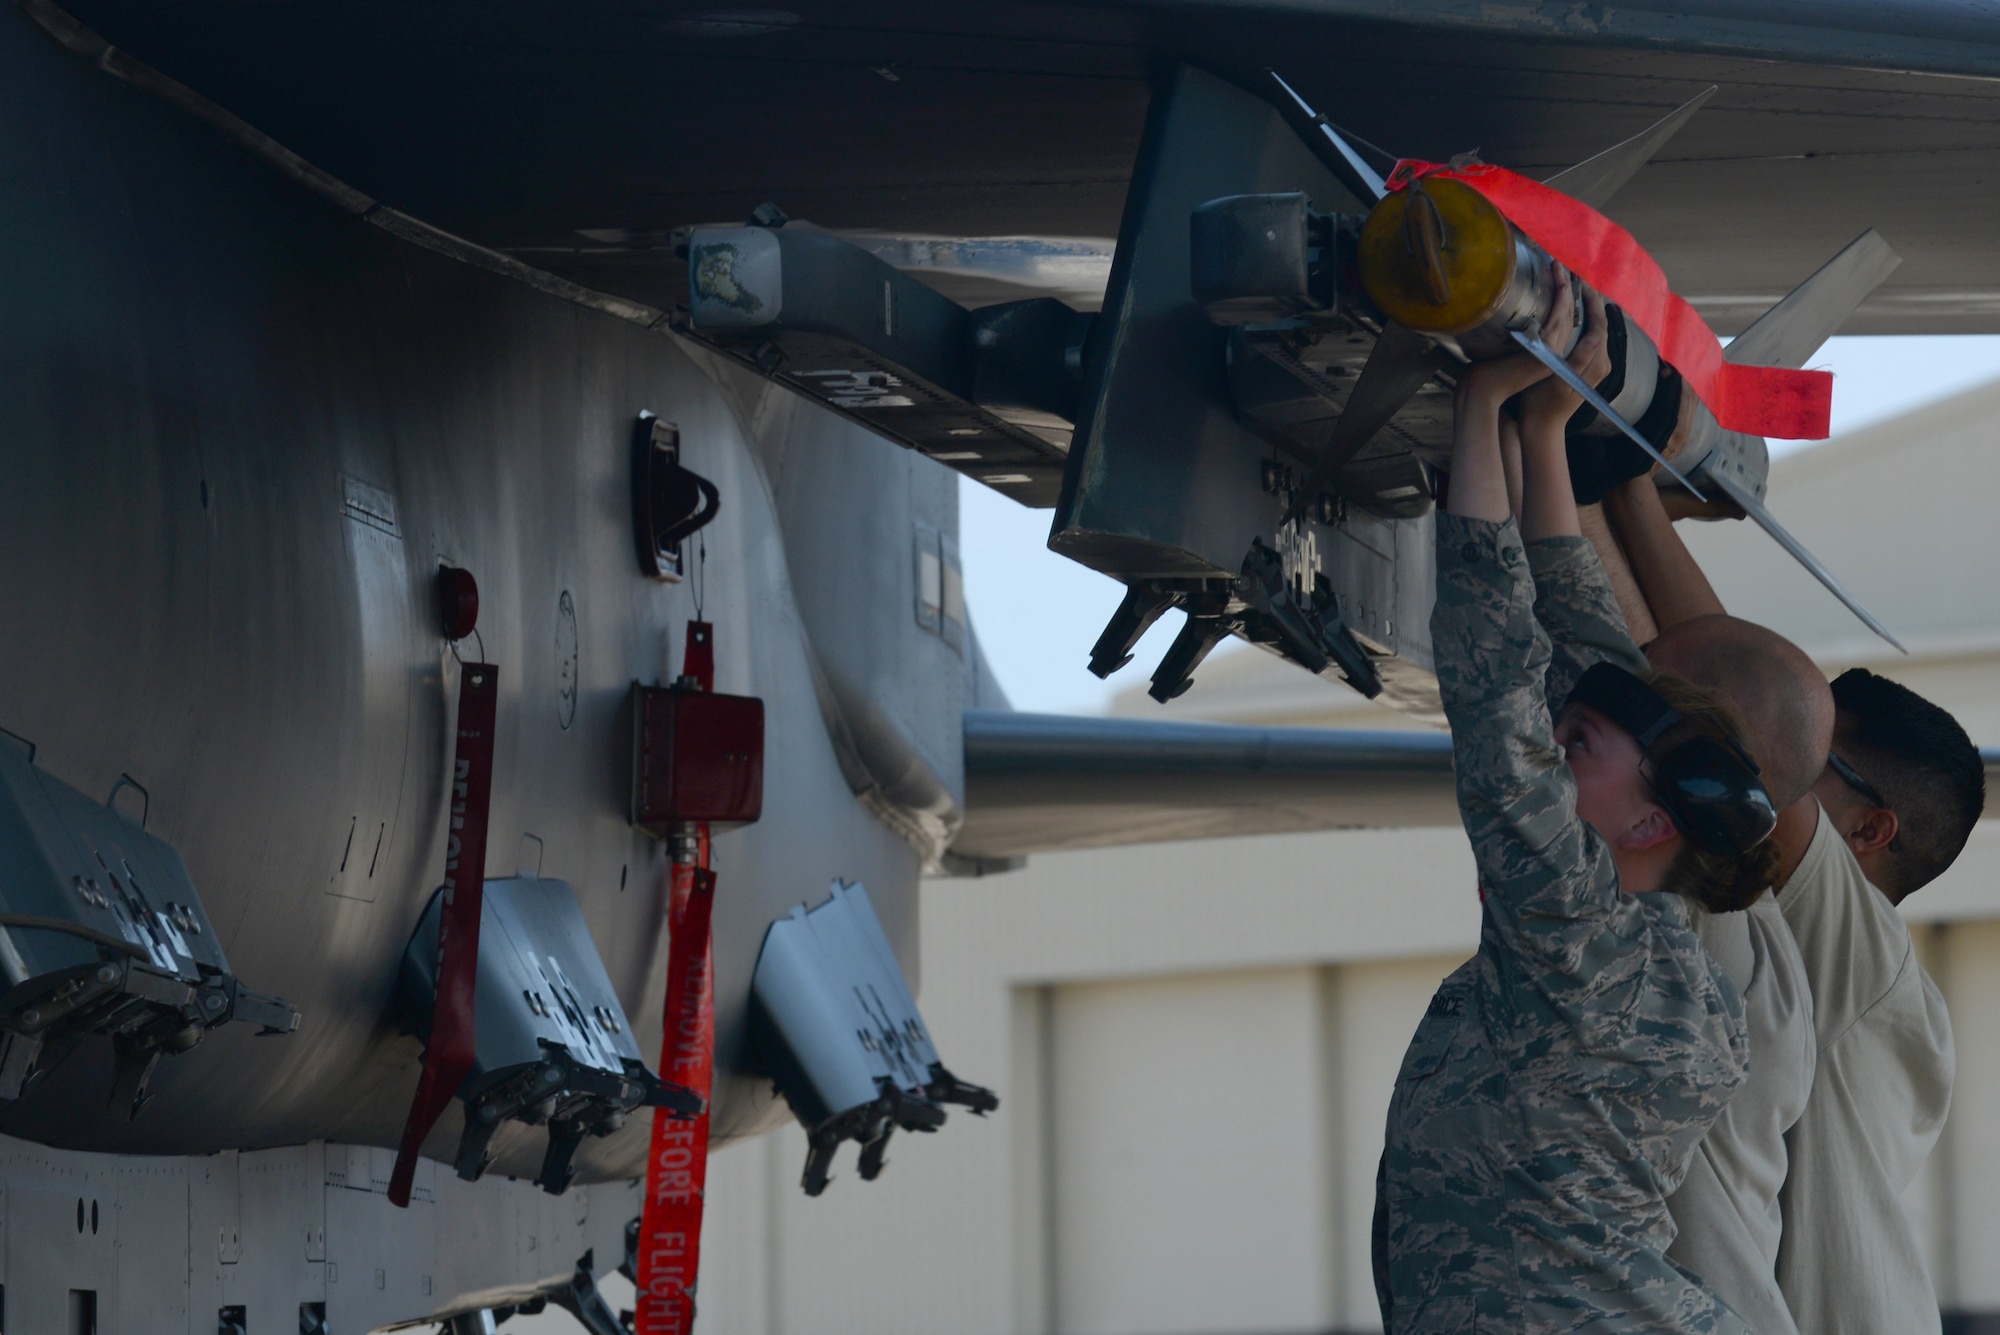 (Right to left) Airman 1st Class Bailey O’Dell, Staff Sgt. Nathaniel Bodell and Airman 1st Class Christian Garibay, 4th Aircraft Maintenance Squadron weapons load crew members, arm an F-15E Strike Eagle with an Aim 9 Sidewinder missile, April 27, 2016, at Seymour Johnson Air Force Base, North Carolina. F-15Es were loaded with missiles and bombs before flying to Hill Air Force Base, Utah, to participate in exercise Combat Hammer. (U.S. Air Force photo by Airman 1st Class Ashley Williamson/Released)